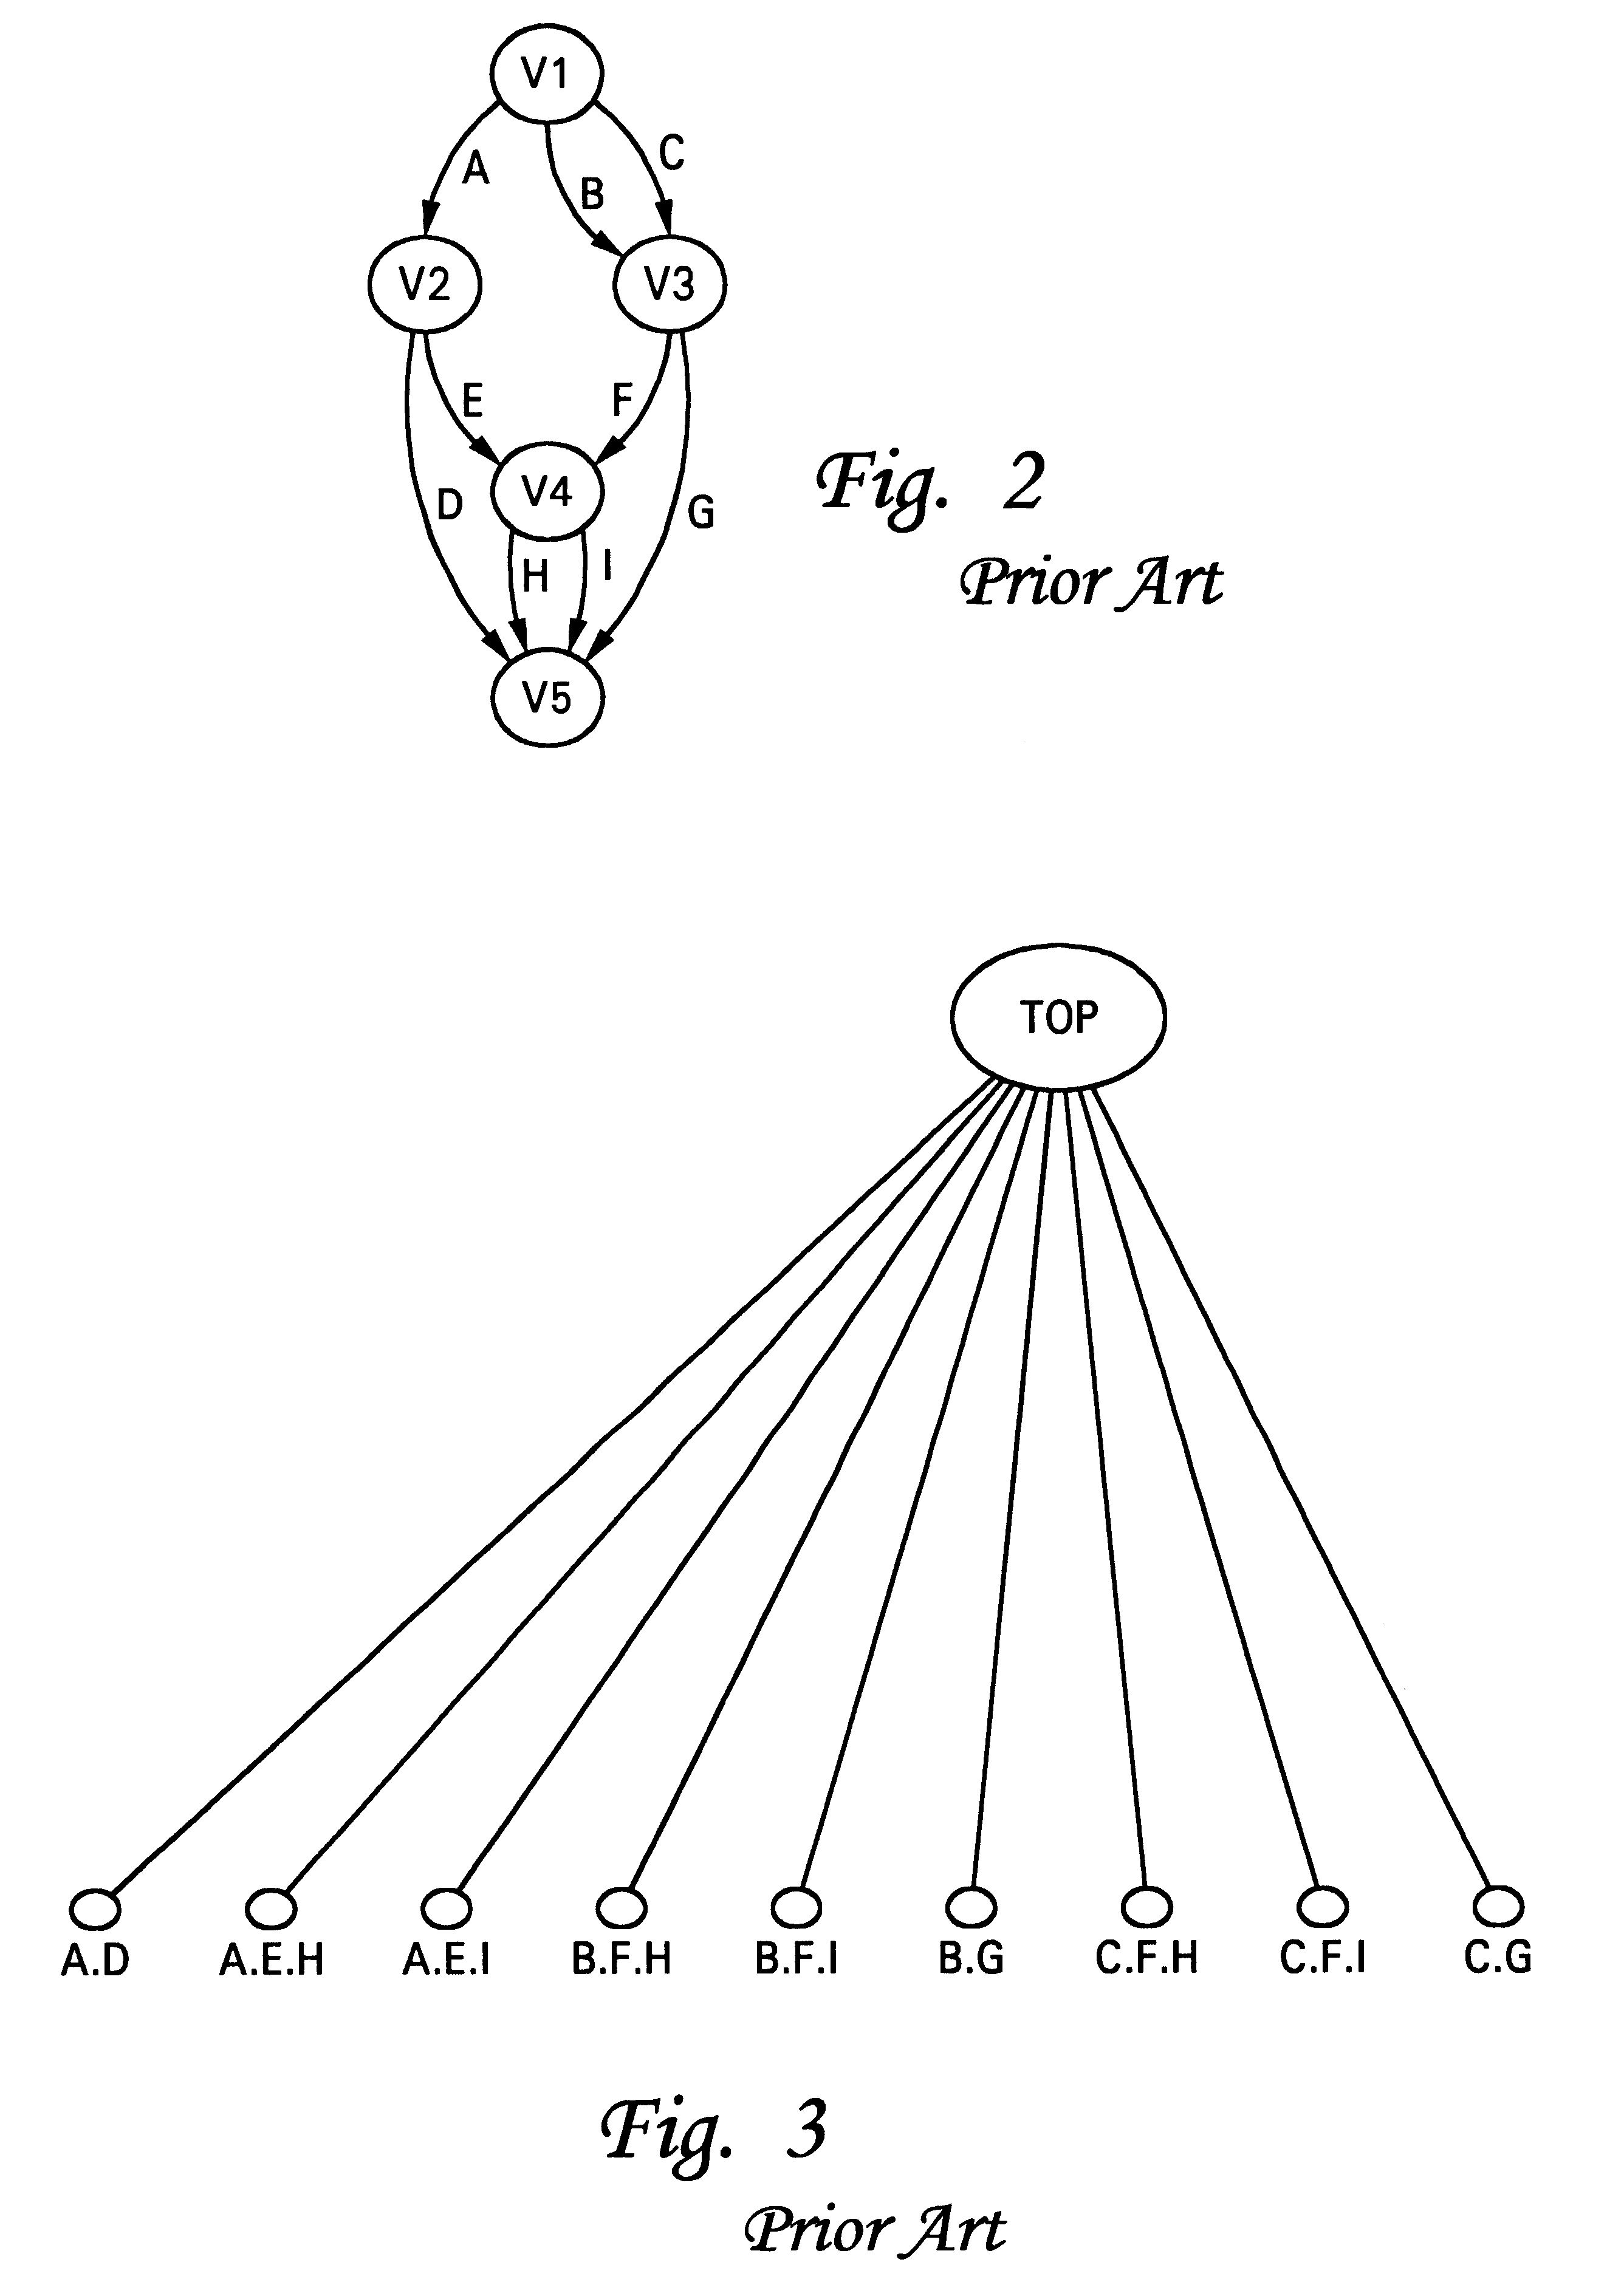 Method and system for efficiently storing and viewing data in a database